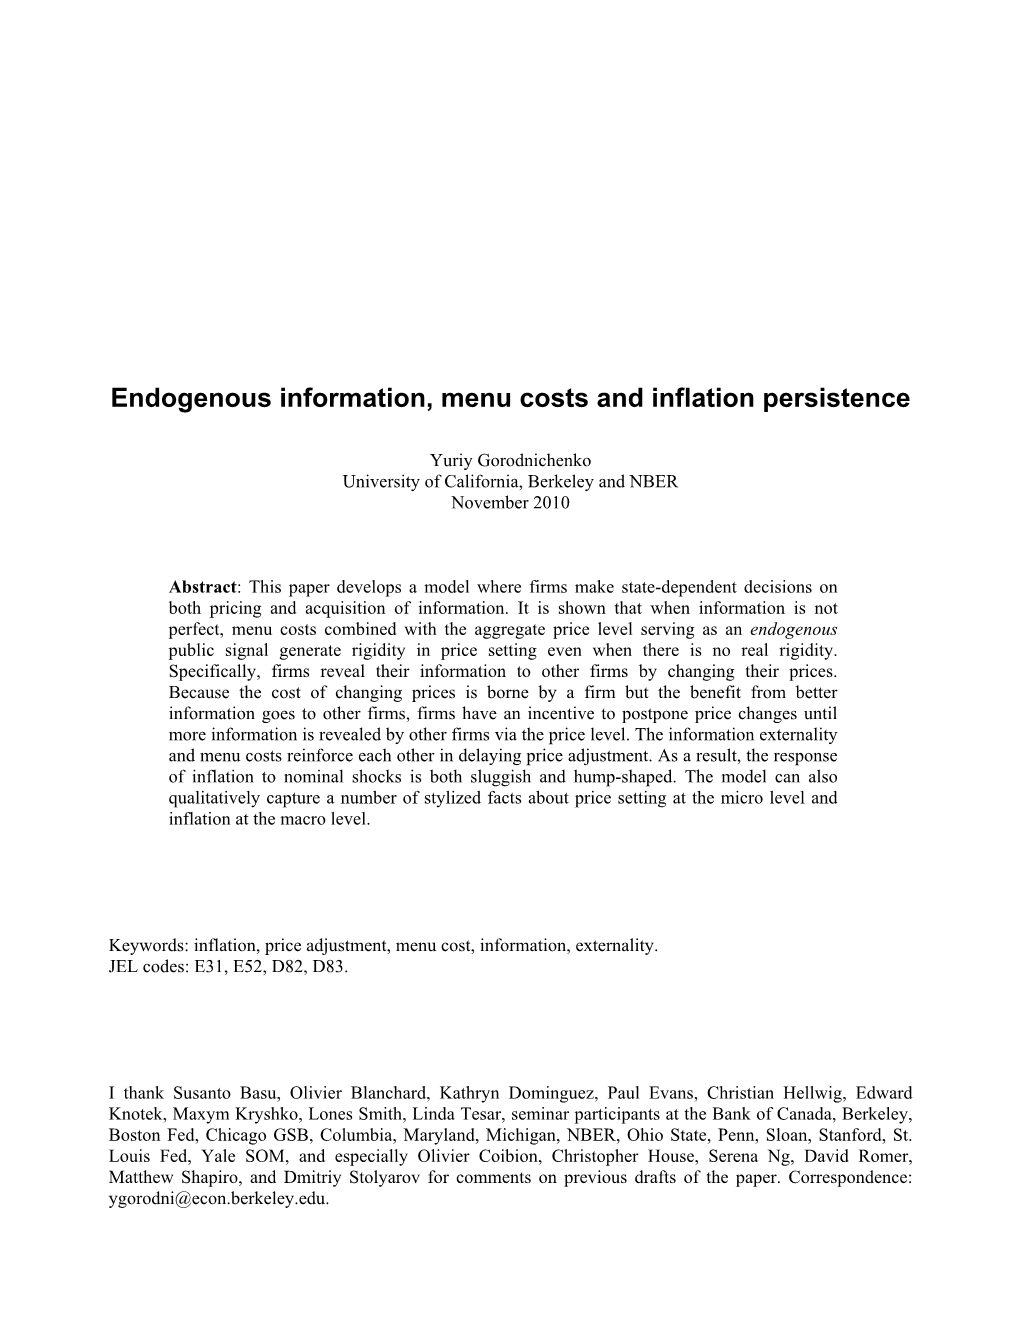 Endogenous Information, Menu Costs and Inflation Persistence